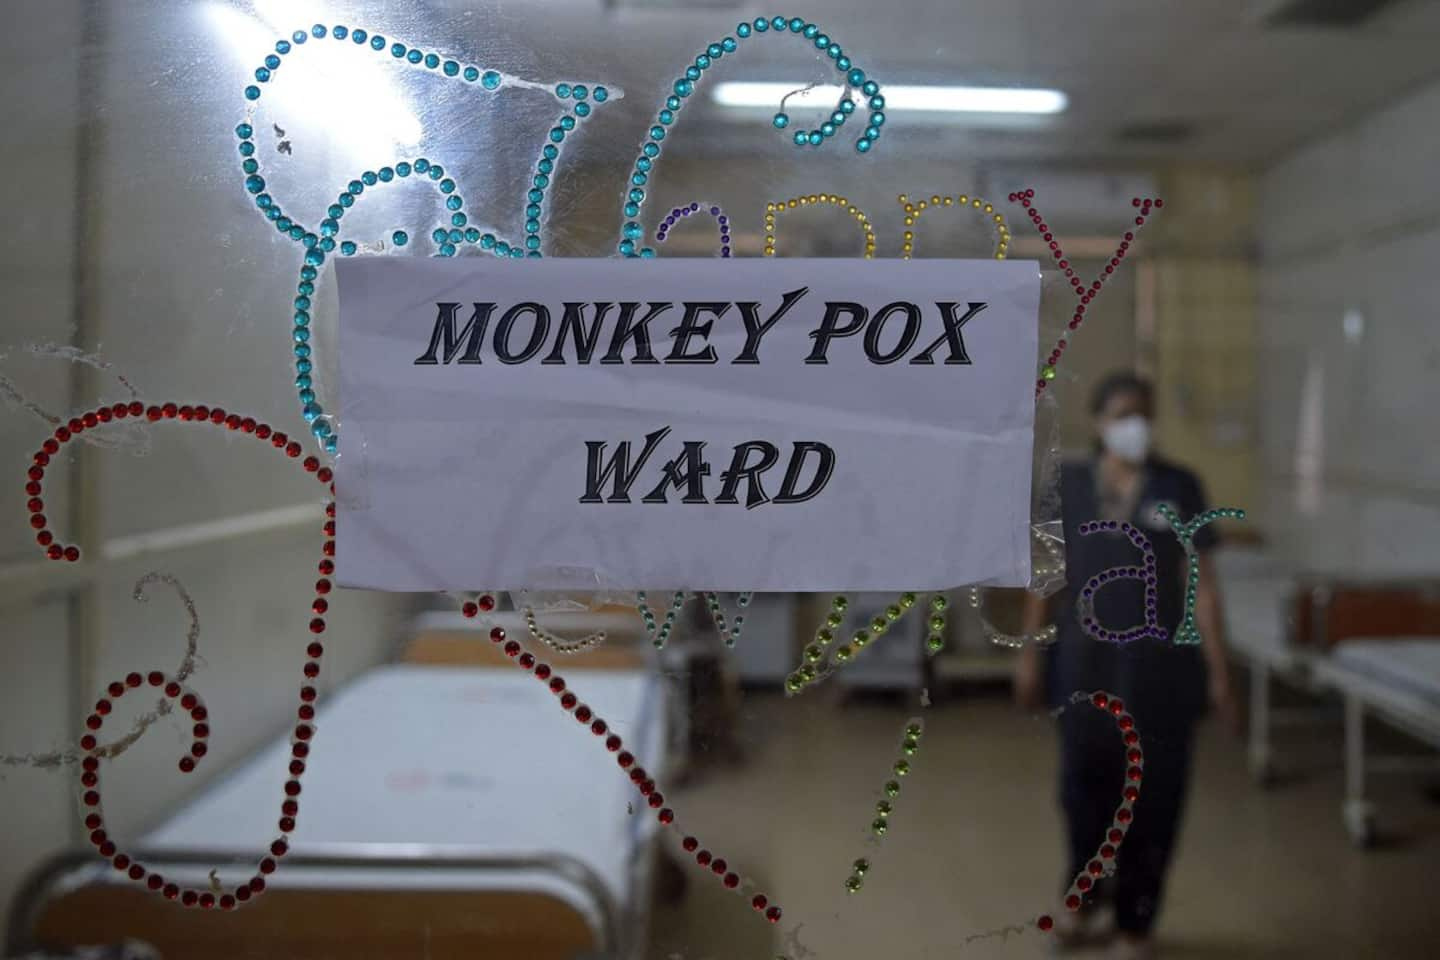 Second death of a patient infected with monkeypox in Spain